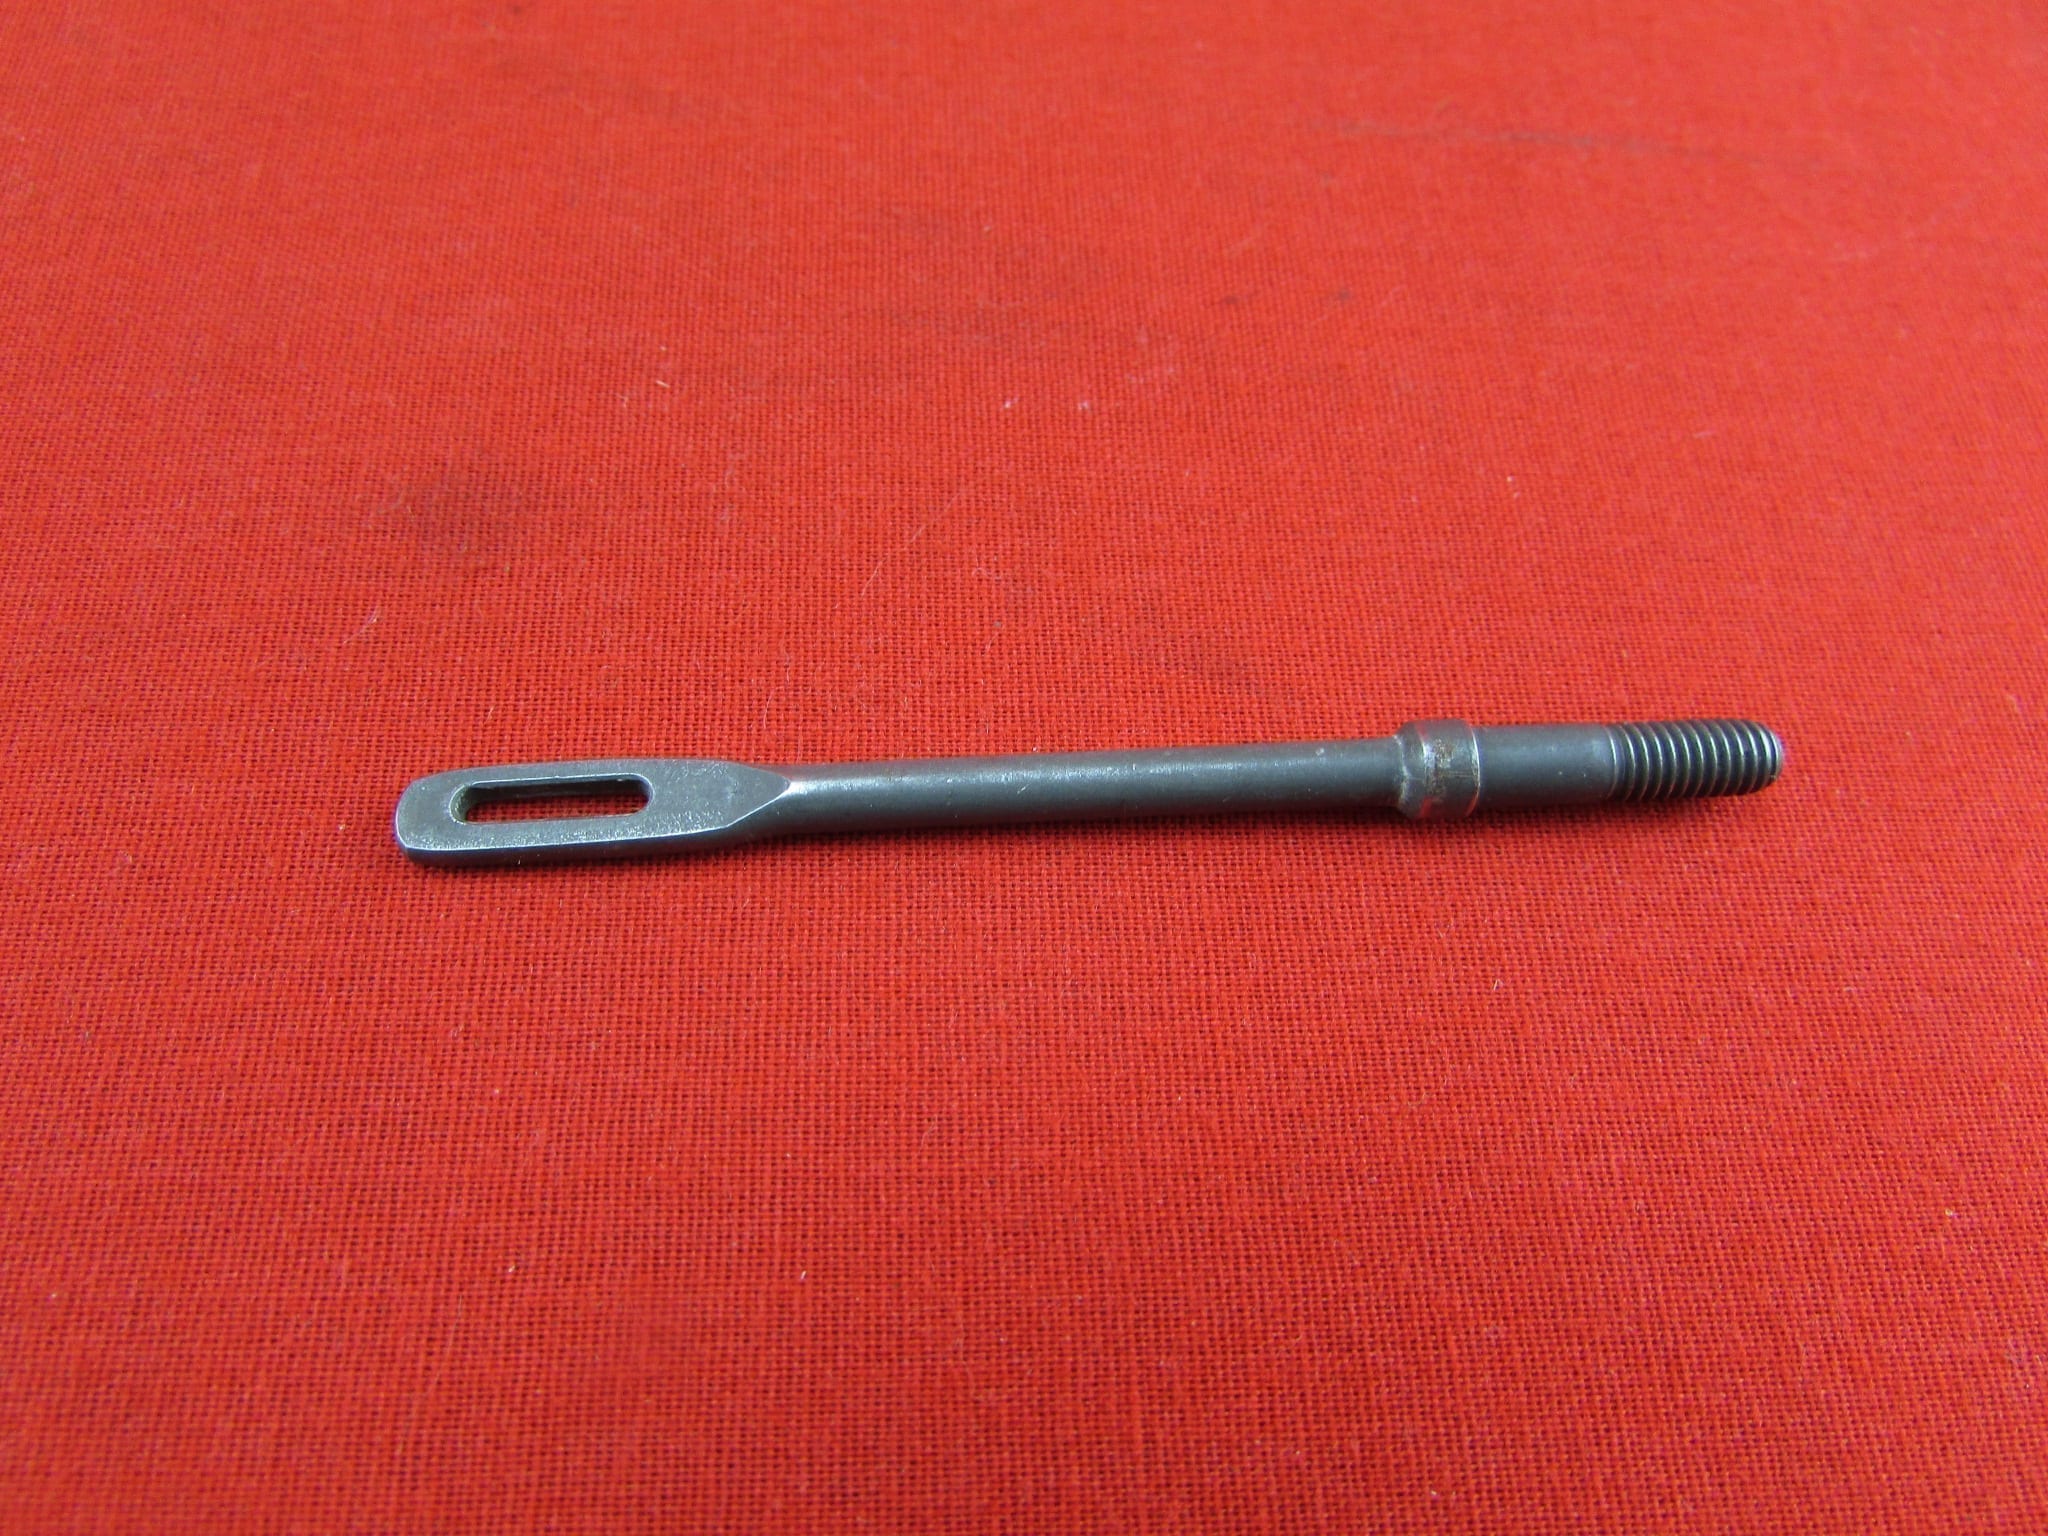 M16 USGI cleaning rod slotted tip | Midwest Military Collectibles